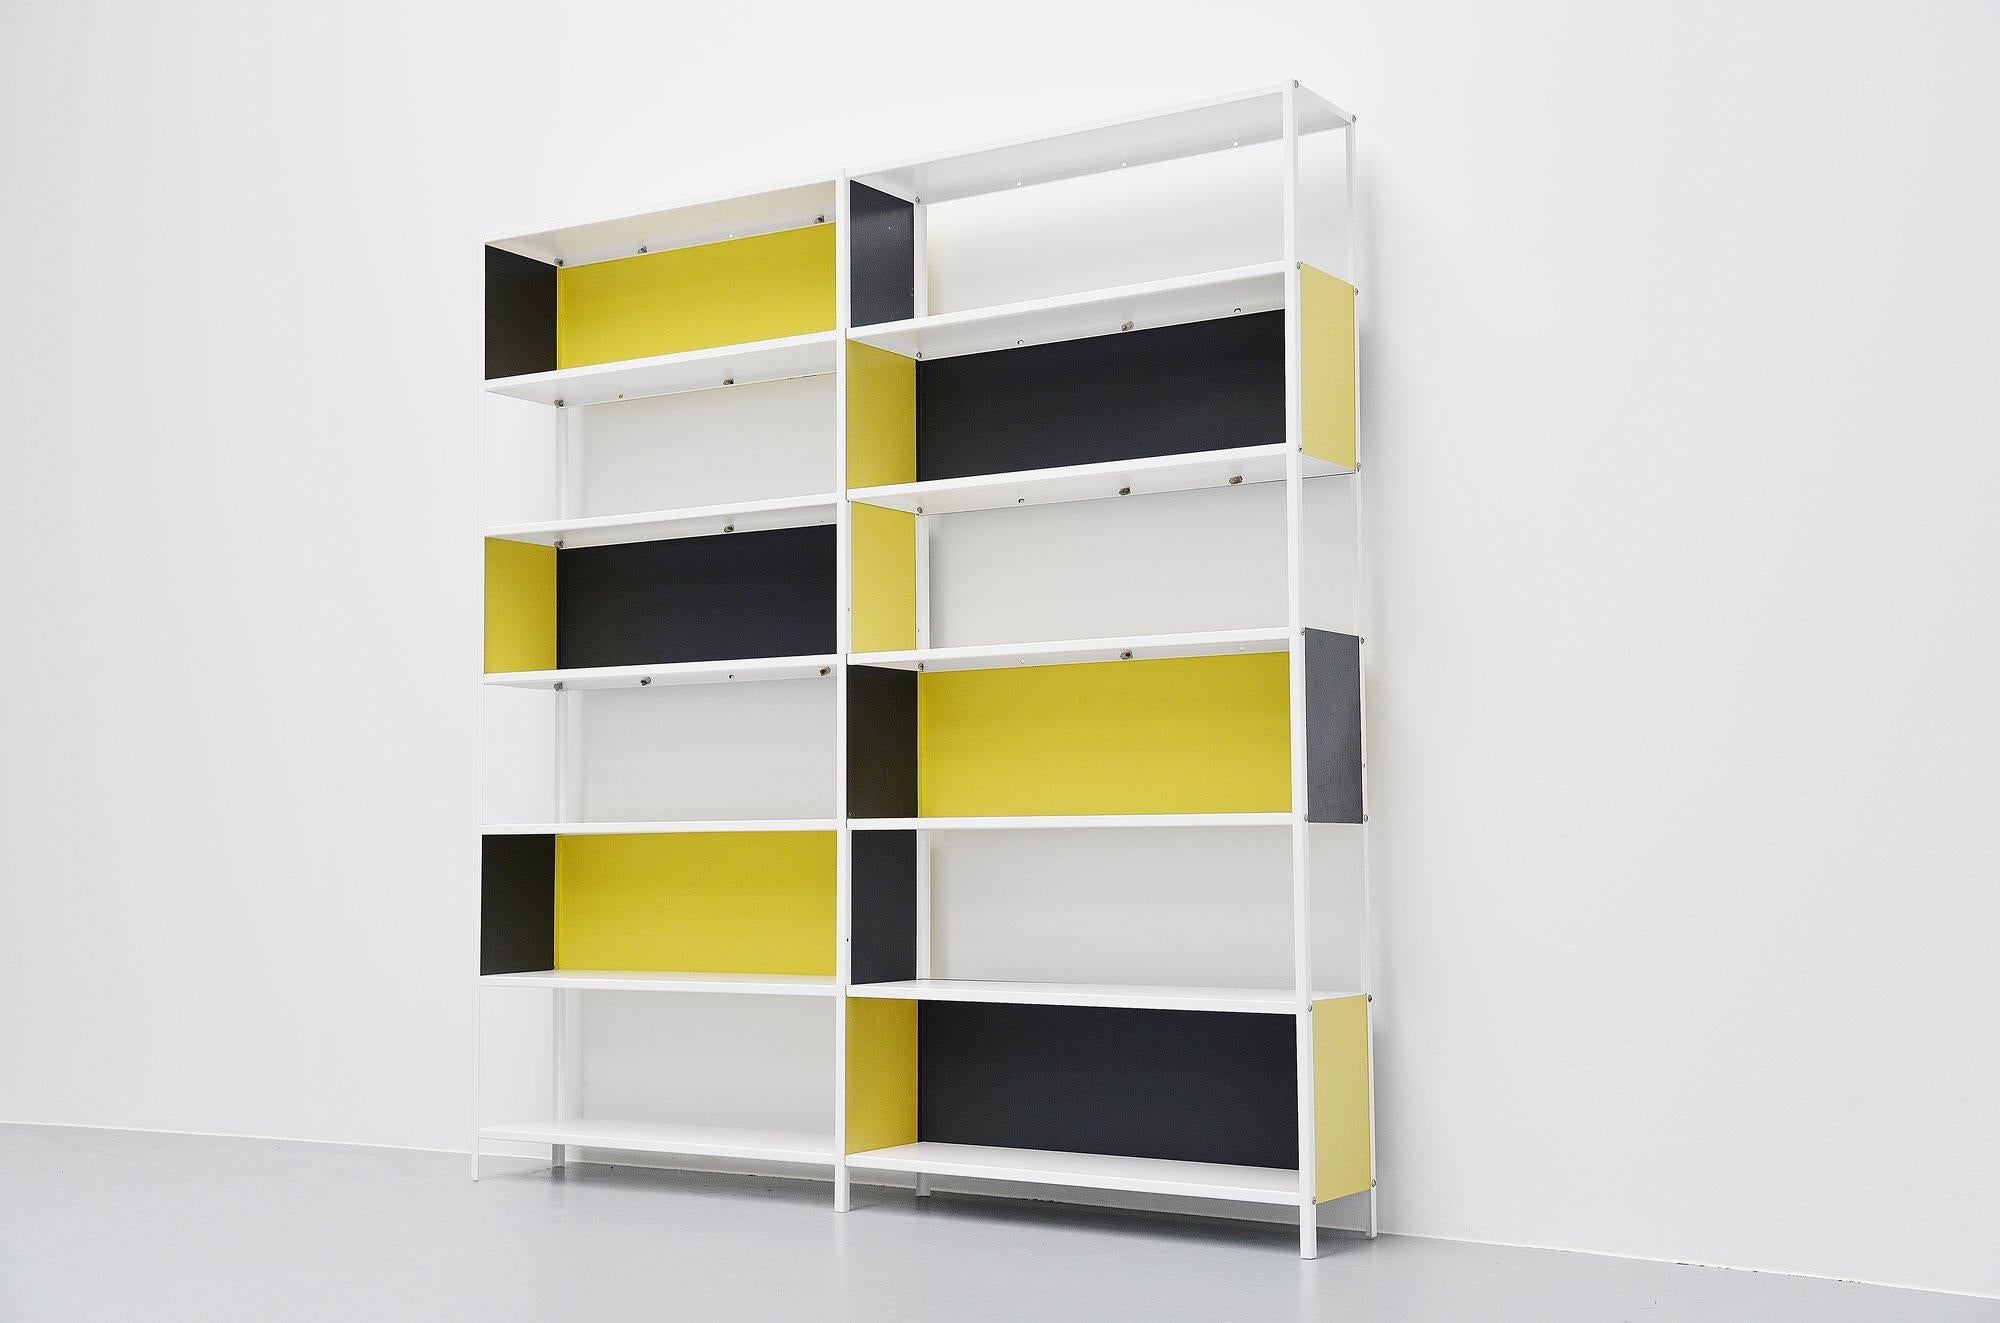 Rare double metal bookcase and shelving unit designed by Friso Kramer for de Beijenkorf, produced by Asmeta in 1953. Martin Visser commissioned Friso Kramer to design a simple usable shelving unit for de Bijenkorf. These bookcases were designed in